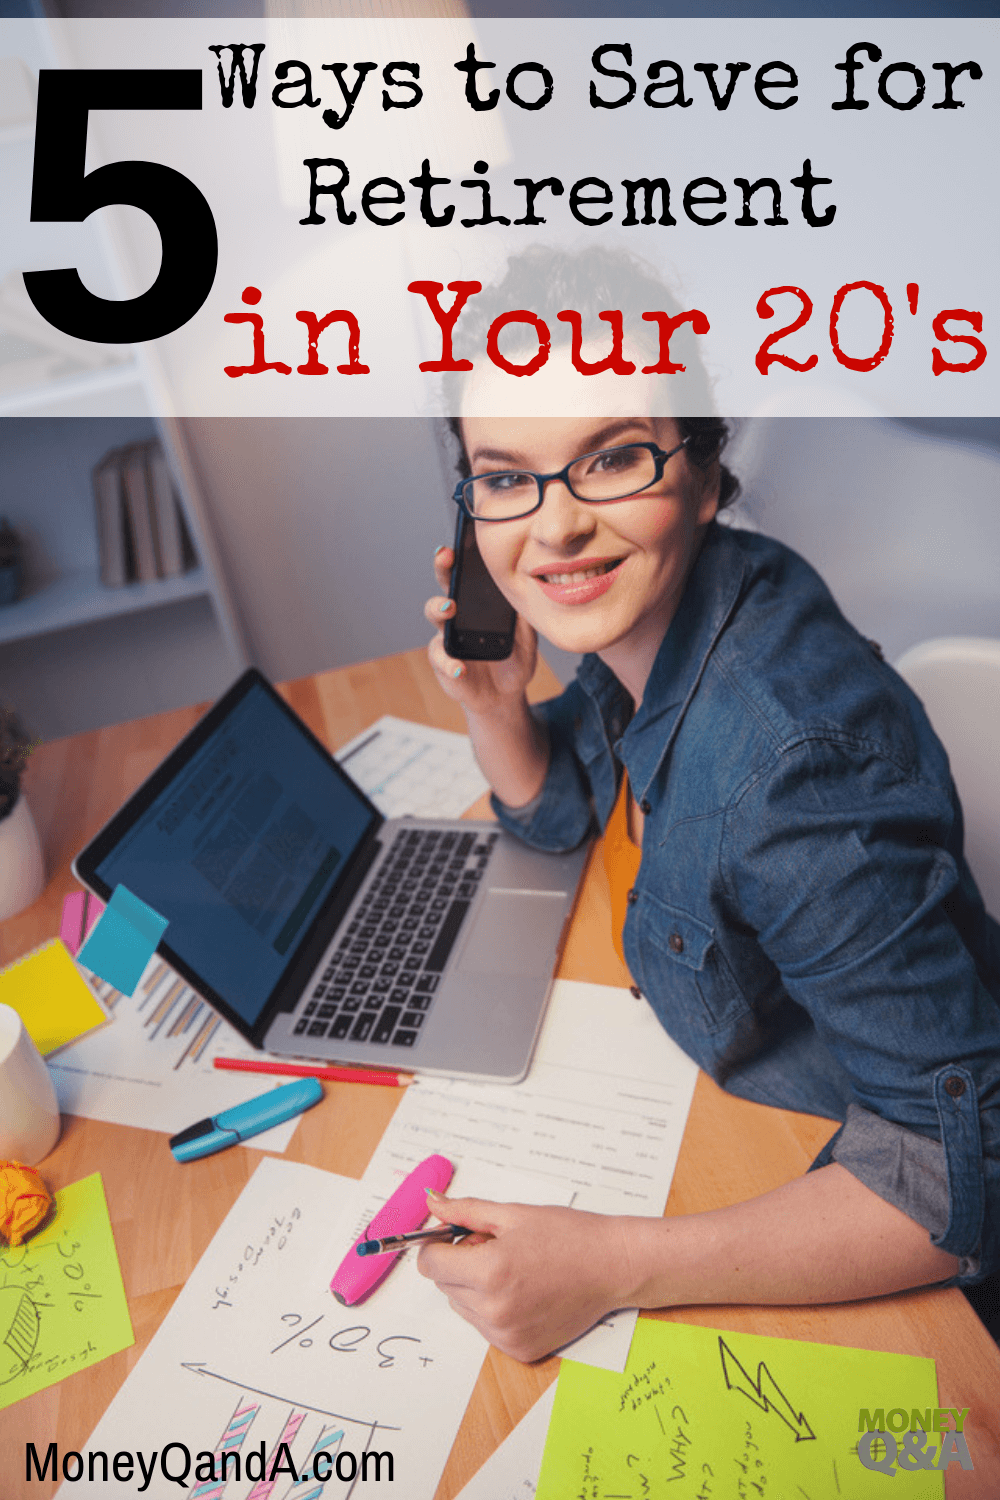 Ways to Start to Saving for Retirement in Your 20s